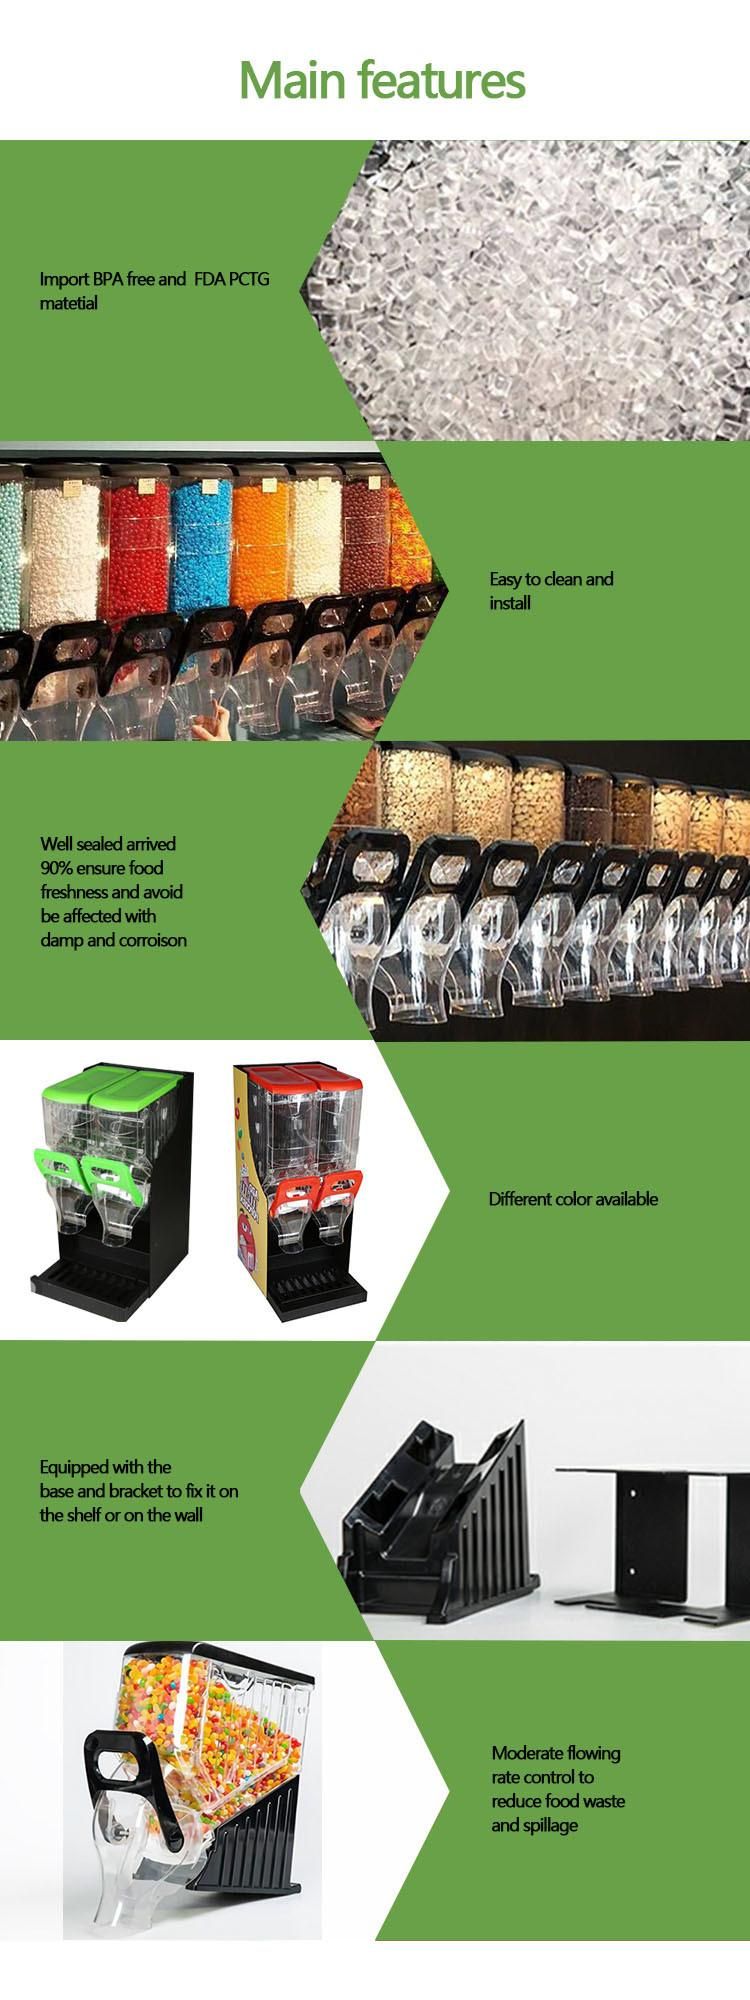 Ecobox Commercial Food Display Containers and Dispenser